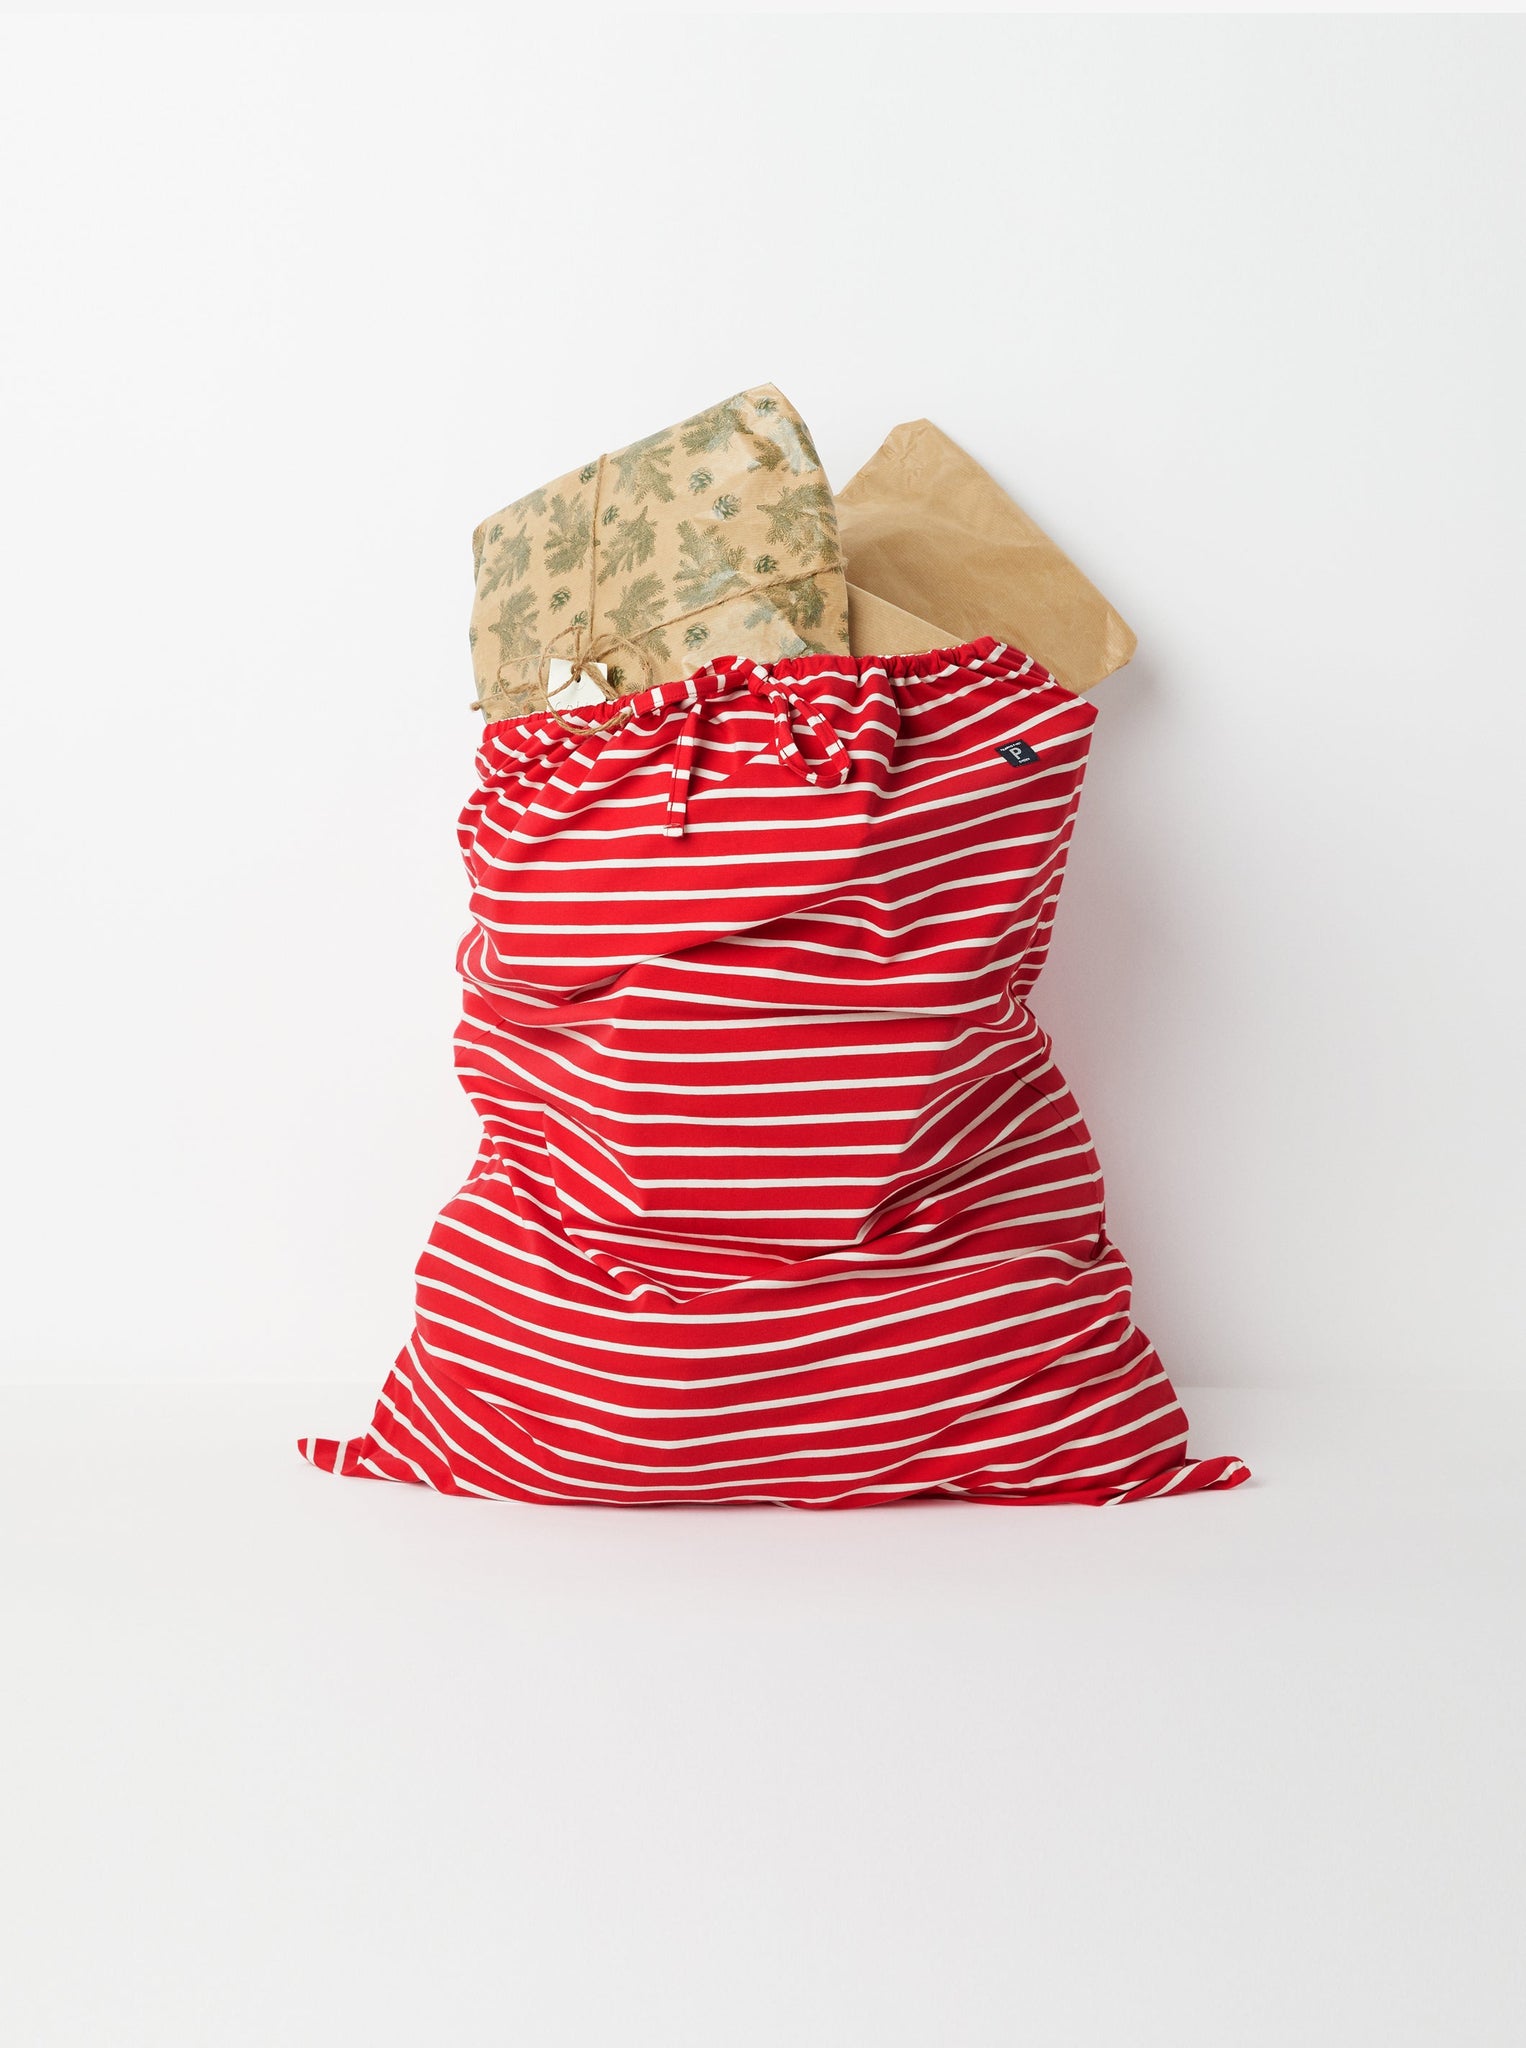 Red Christmas Present Sack from the Polarn O. Pyret kidswear collection. Made using ethically sourced materials